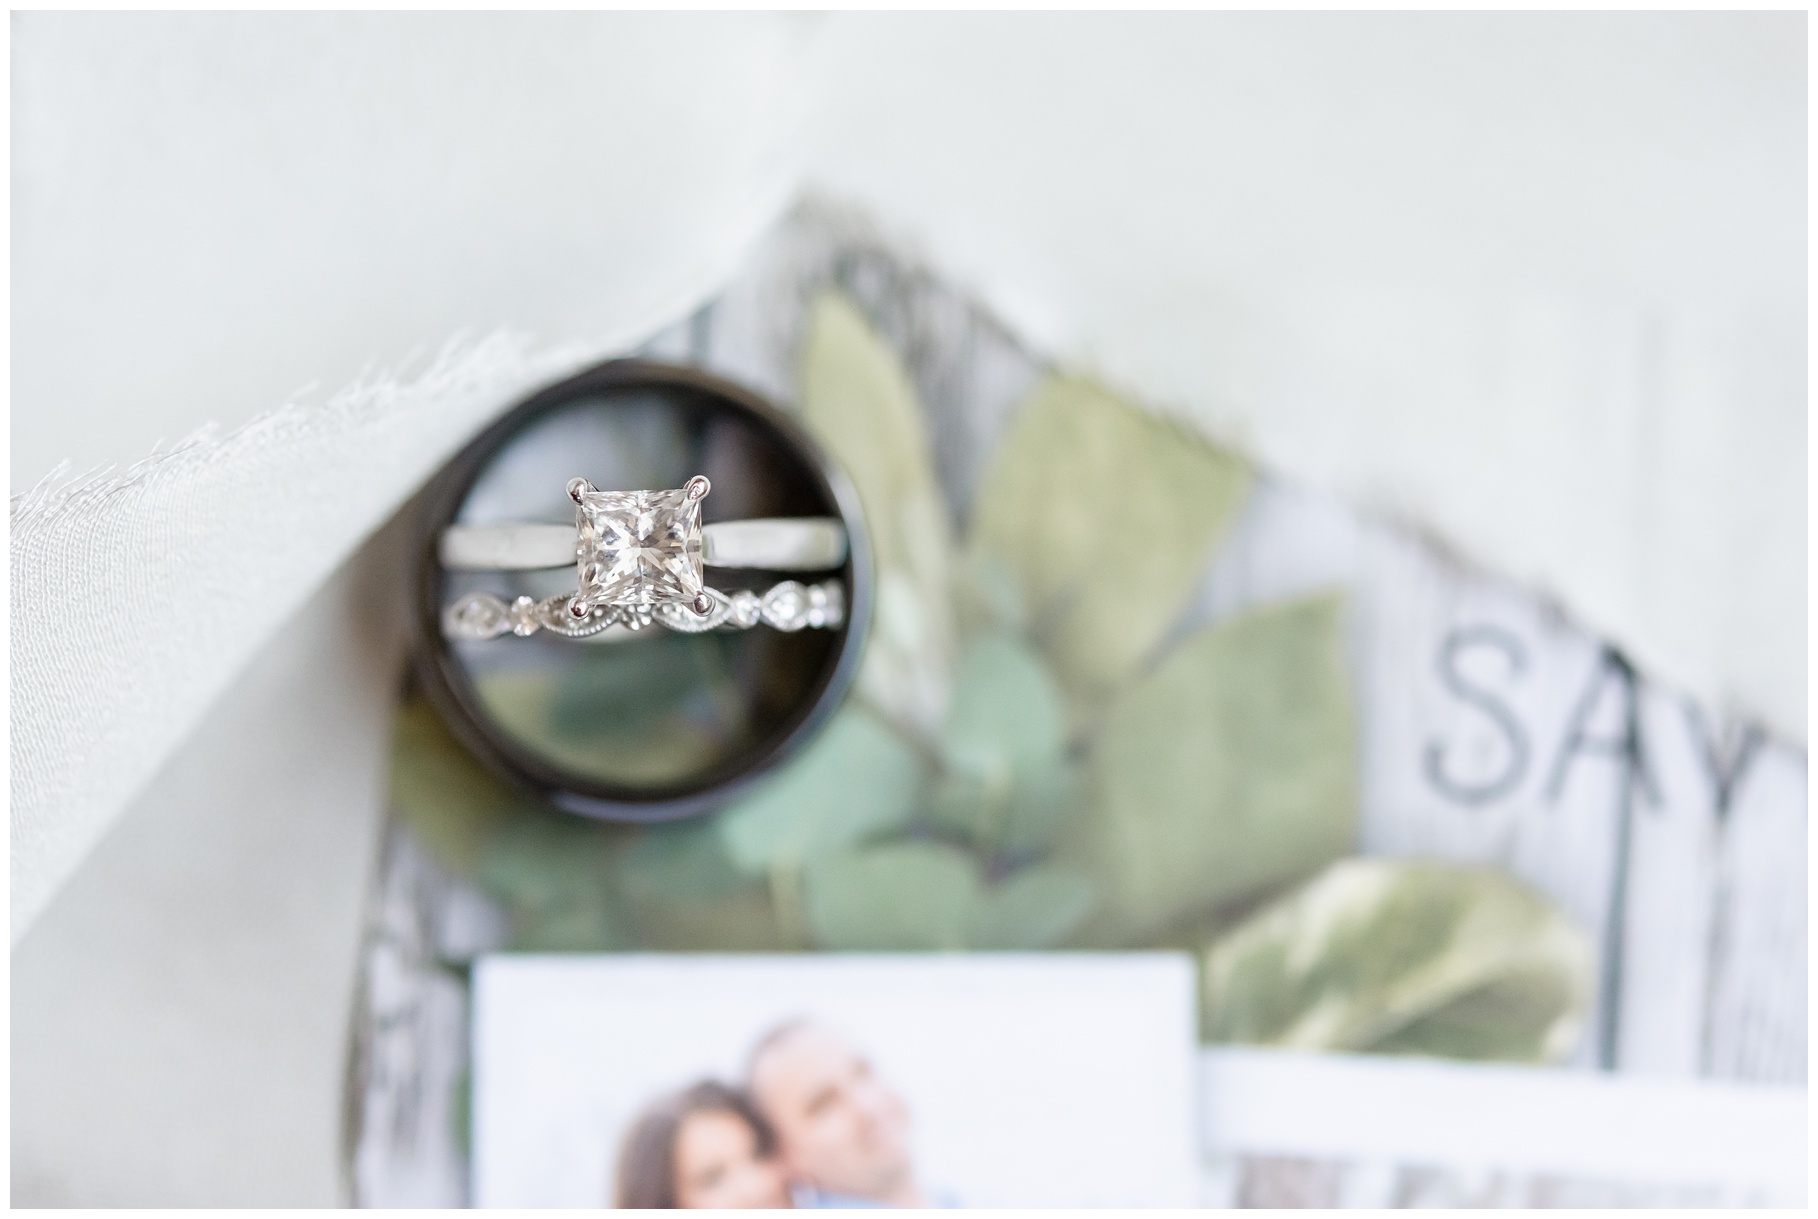 Wedding rings on save the date